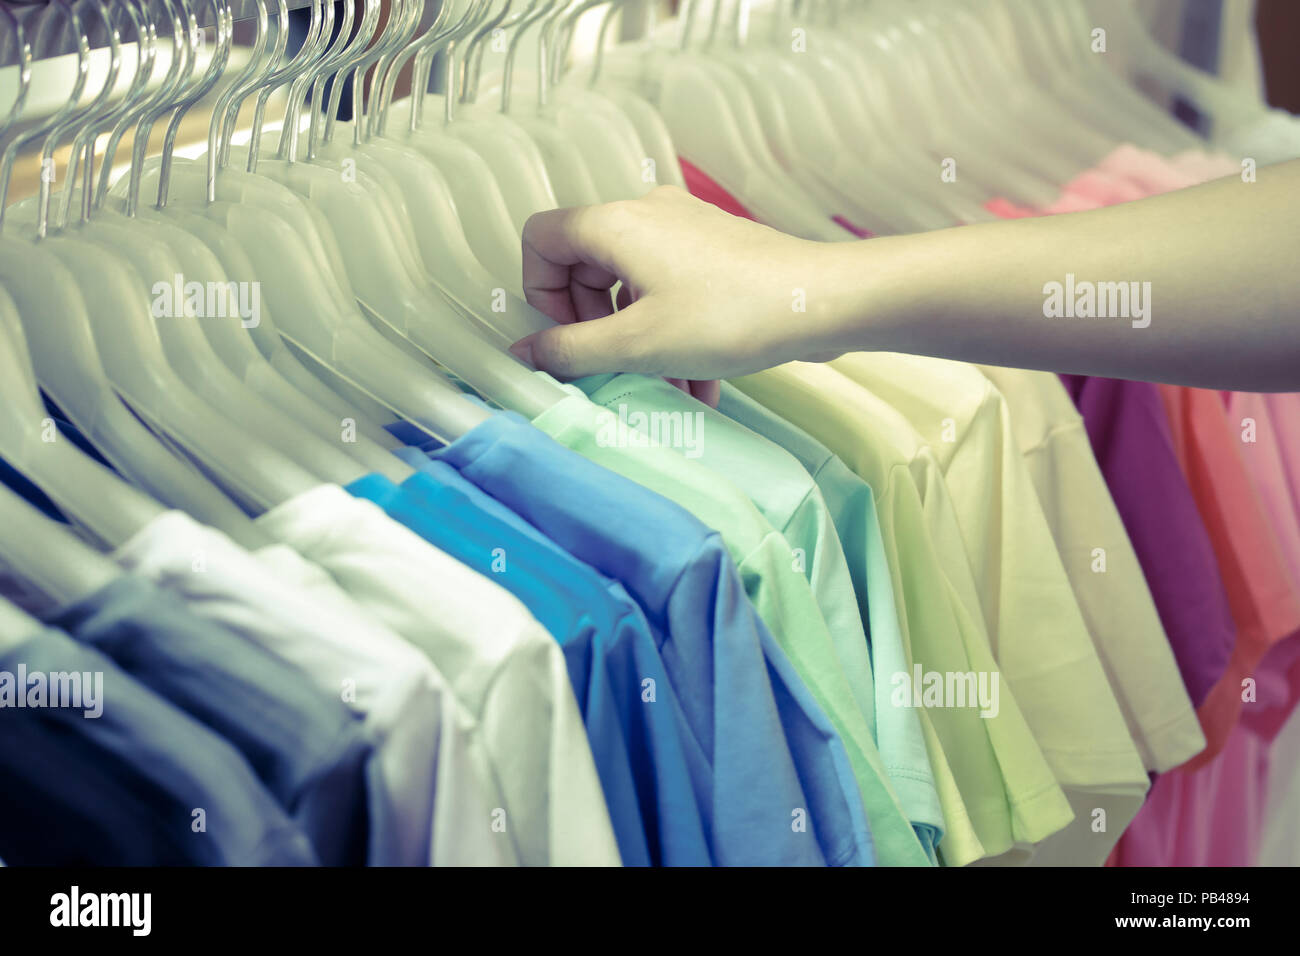 Colorful t-shirt on hangers -  vintage effect Stock Photo